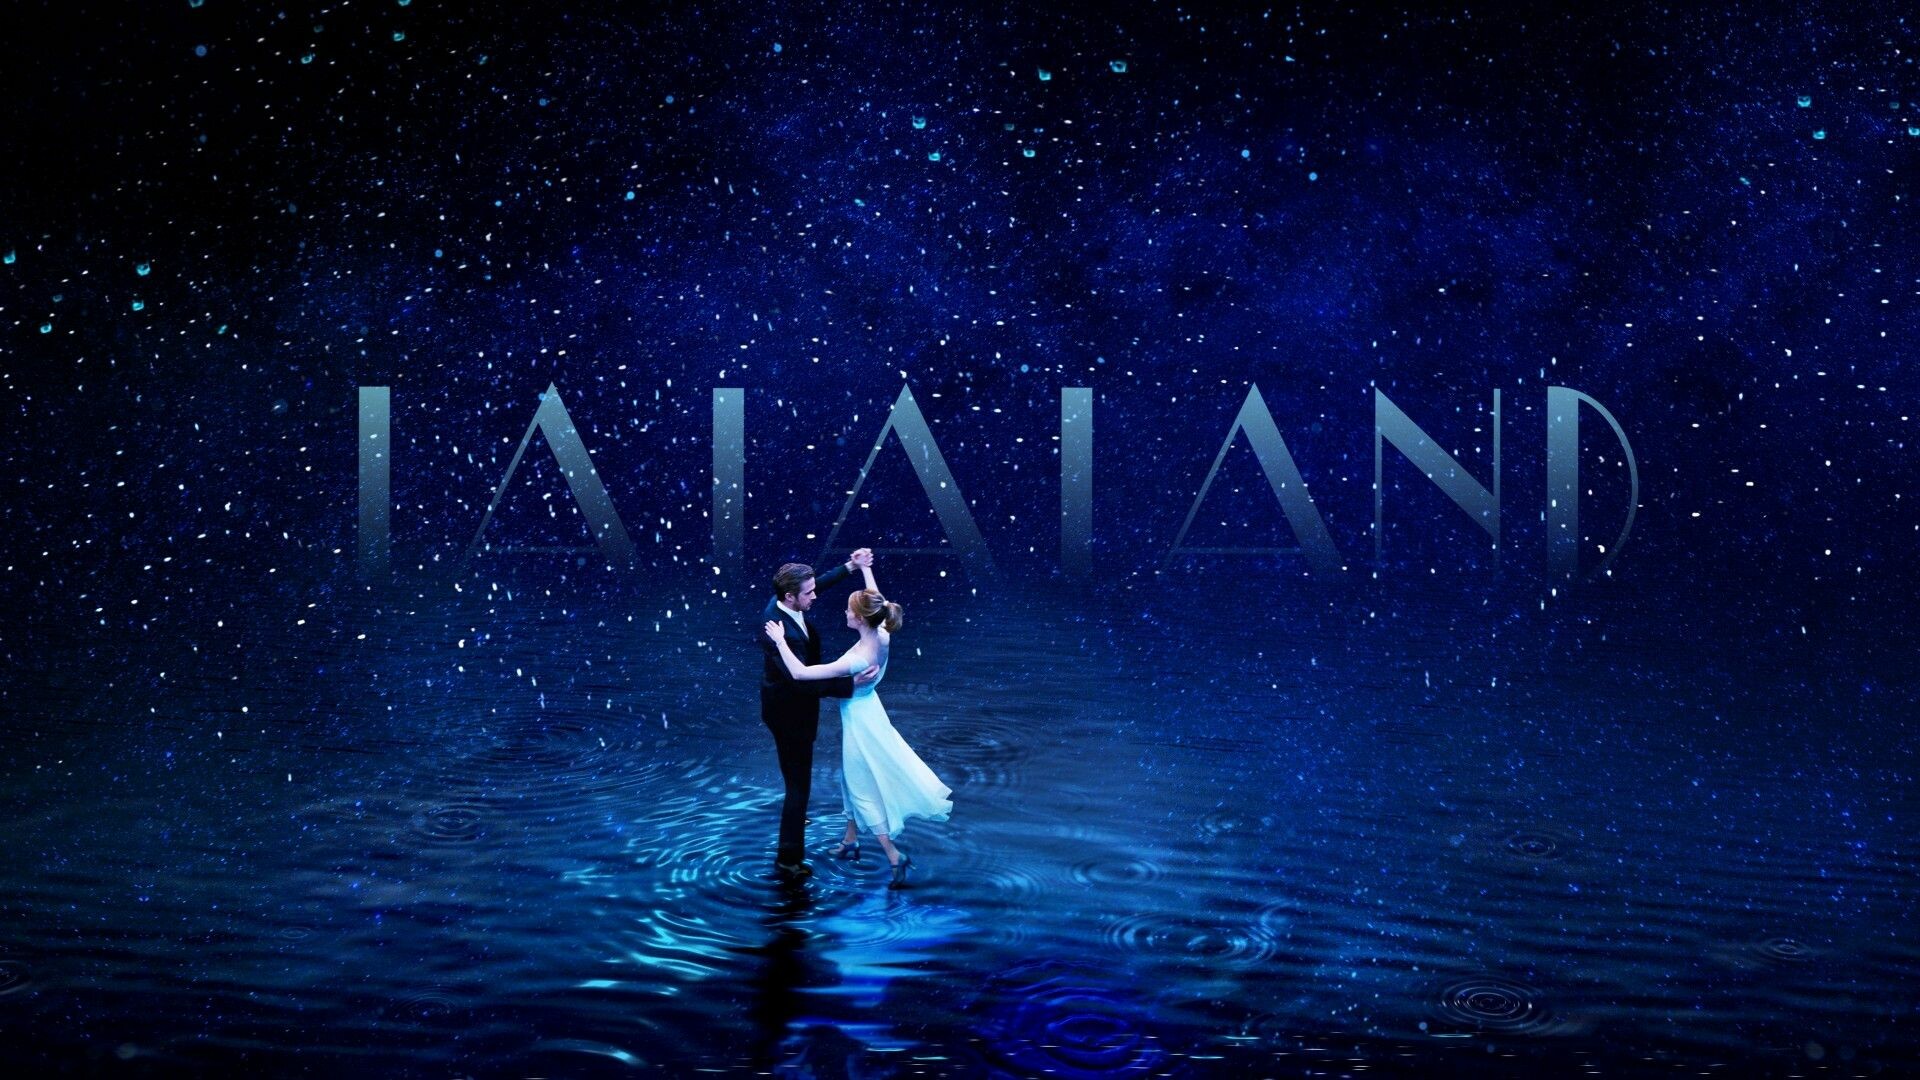 La La Land: A musical about a struggling jazz pianist and an aspiring actress trying to fulfill their dreams. 1920x1080 Full HD Wallpaper.